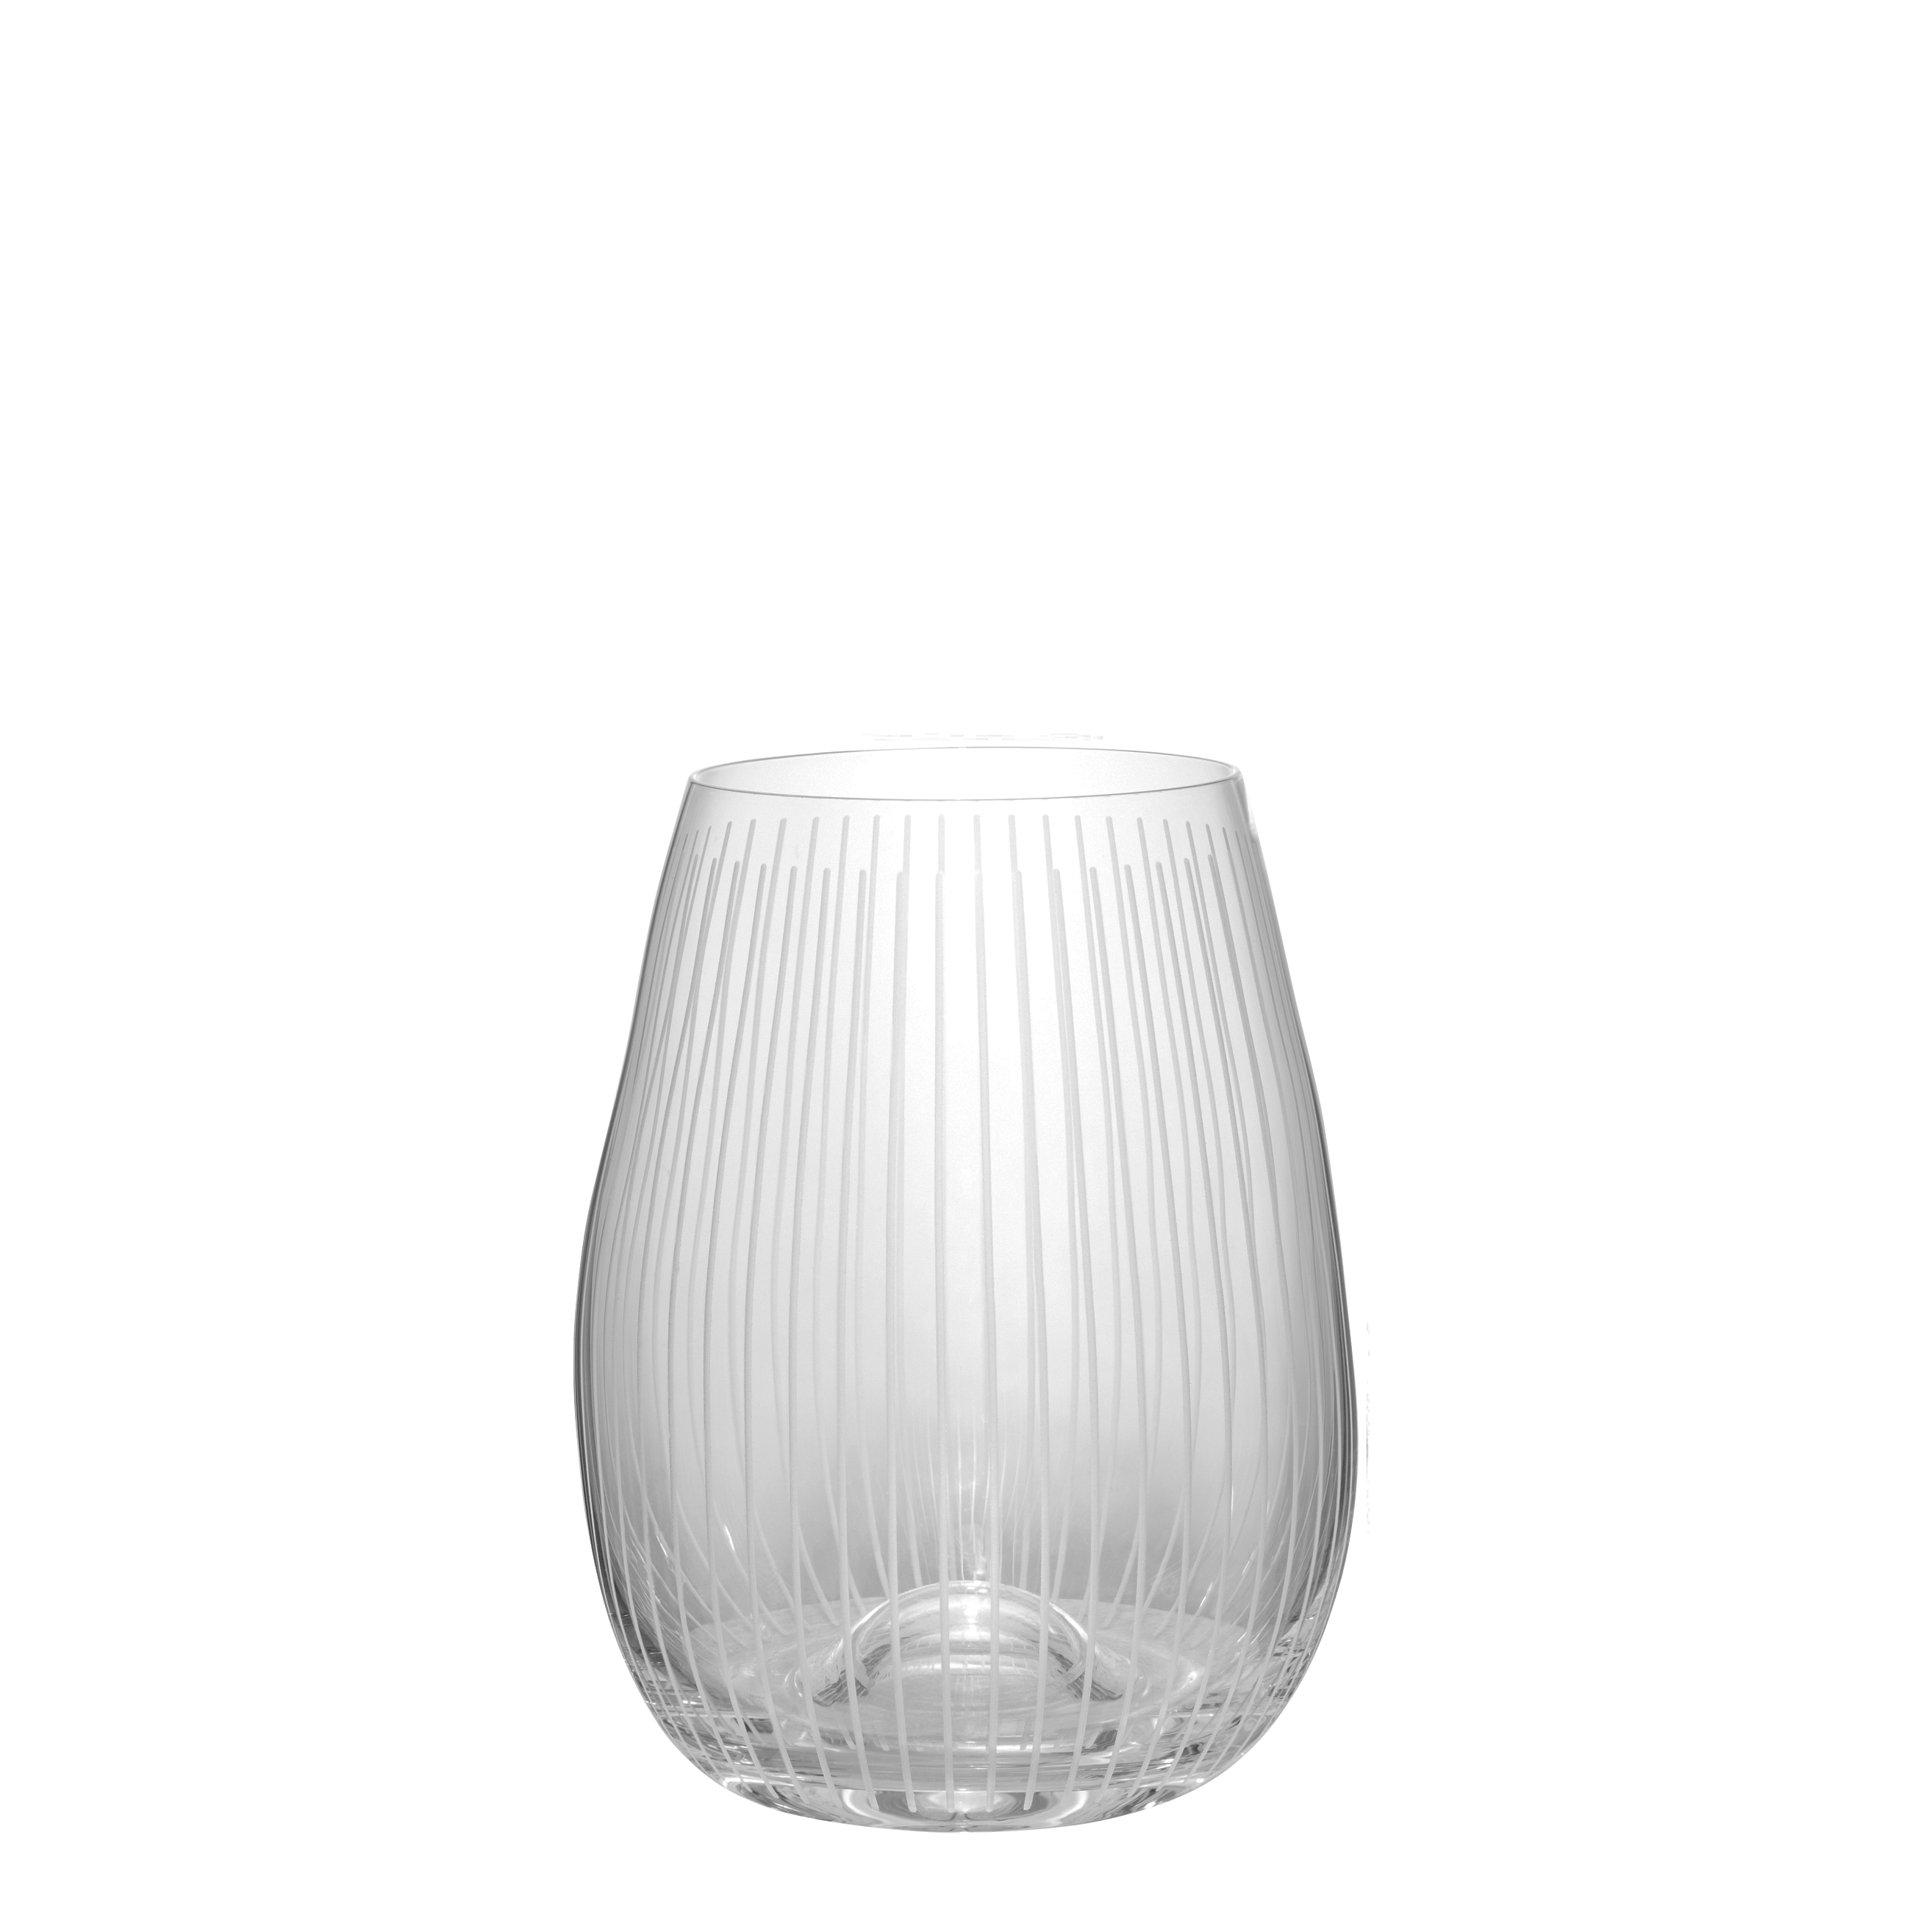 Etched Glasses - Stemless Wine